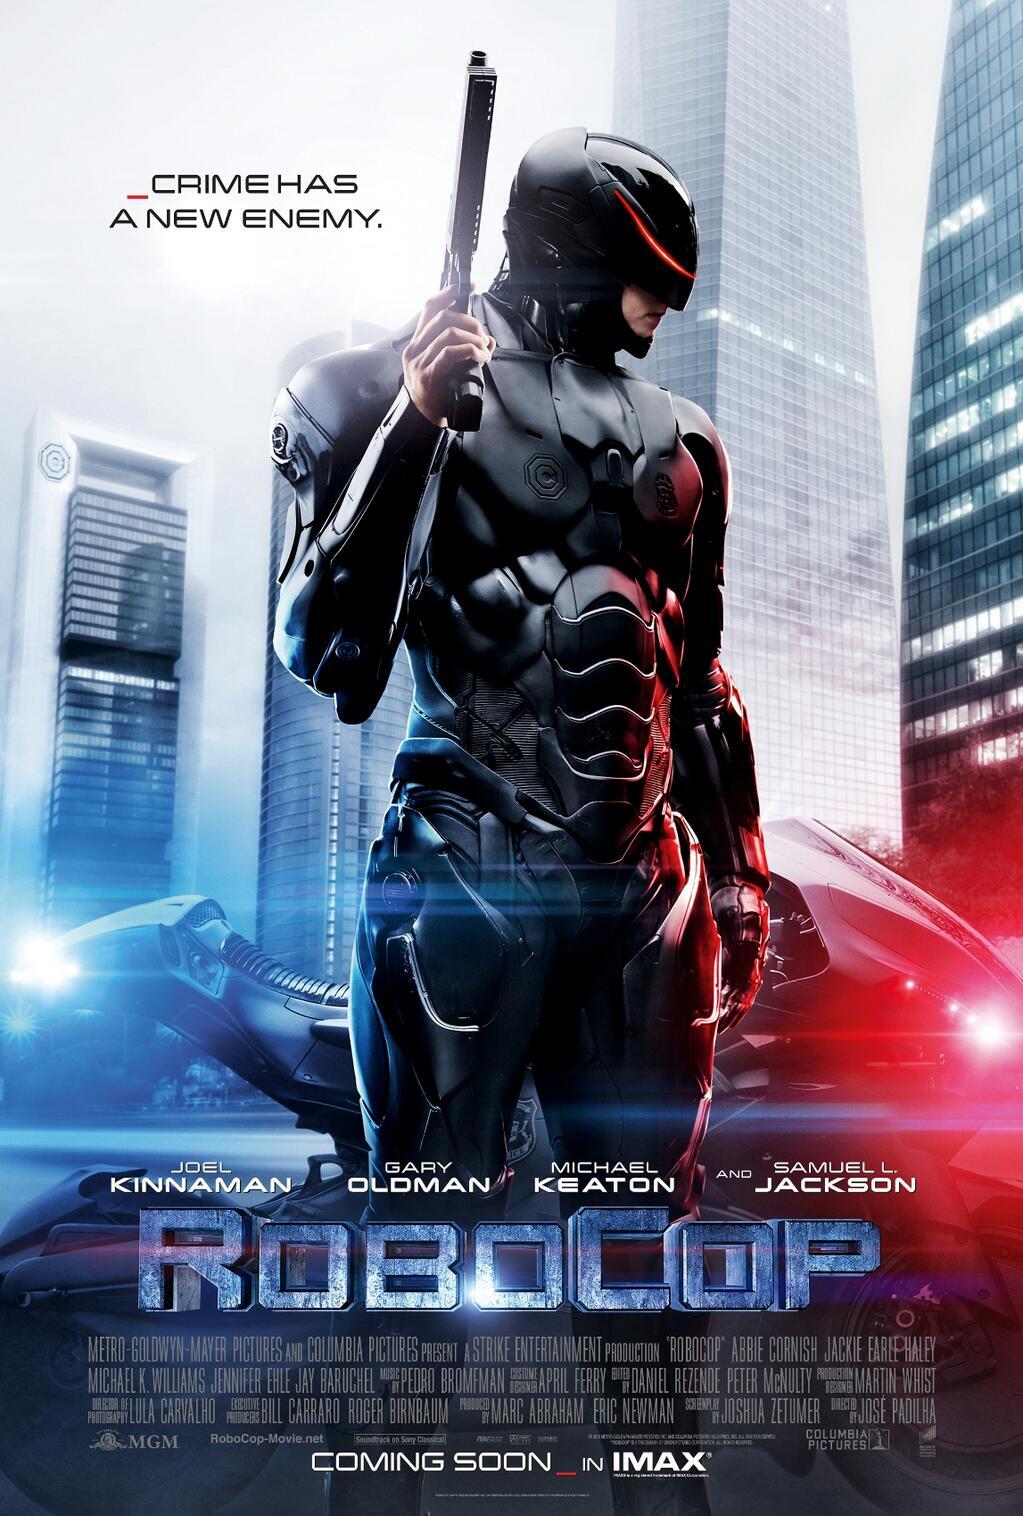 http://images1.wikia.nocookie.net/__cb20131109011449/filmguide/images/a/a0/Robocop_2014_poster_003.jpg